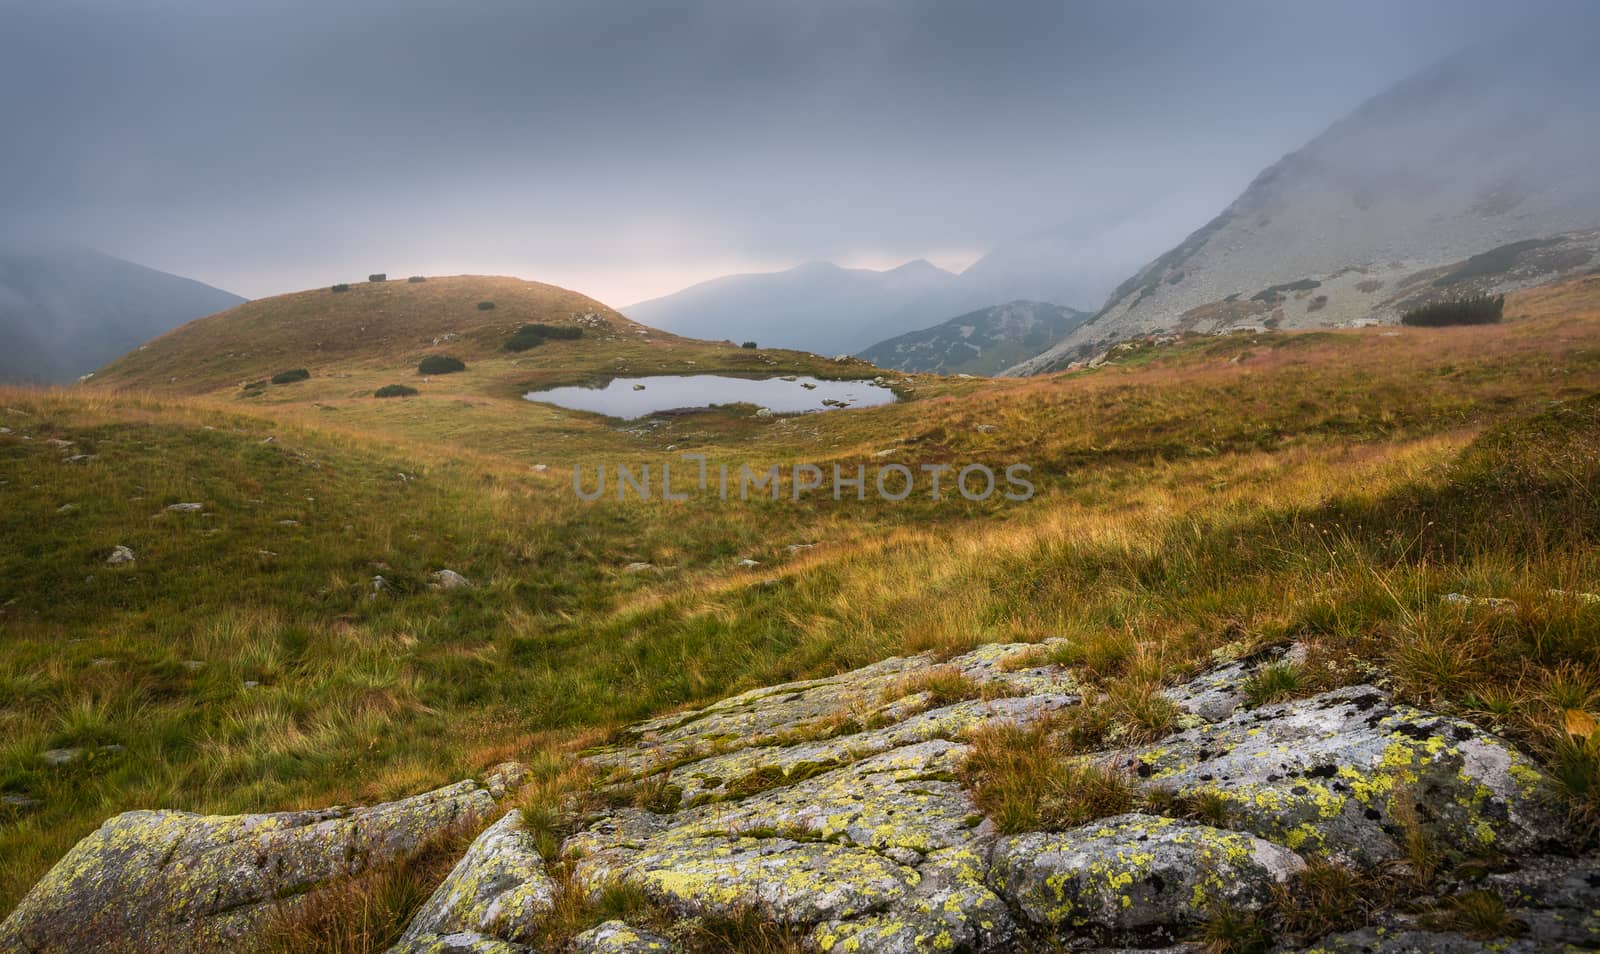 Foggy Mountain Landscape with a Tarn and a Rock in Foreground at Sunset